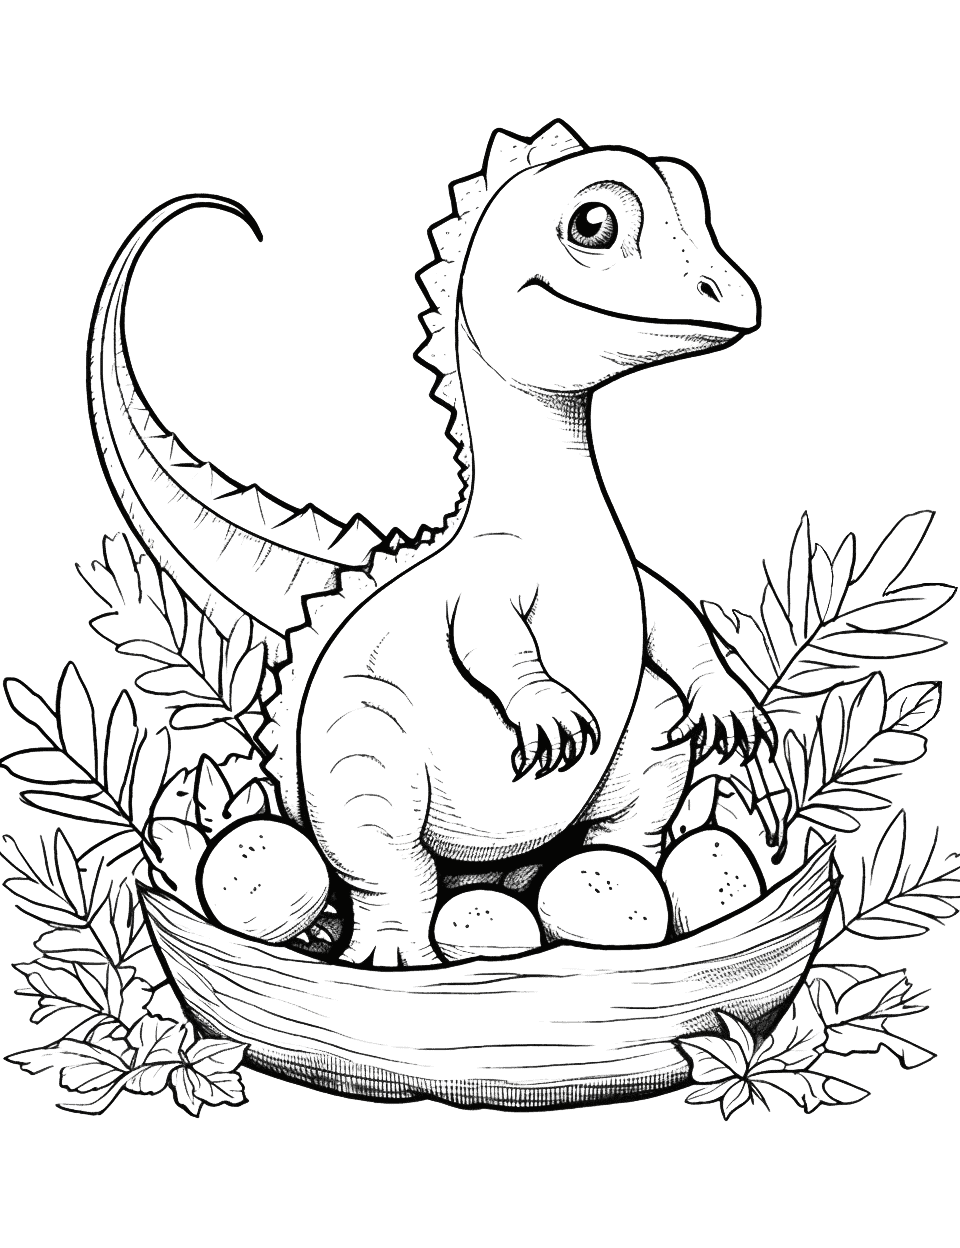 Baby Dinosaur and Eggs Coloring Page - A baby dinosaur with a nest full of unhatched eggs, awaiting their siblings.